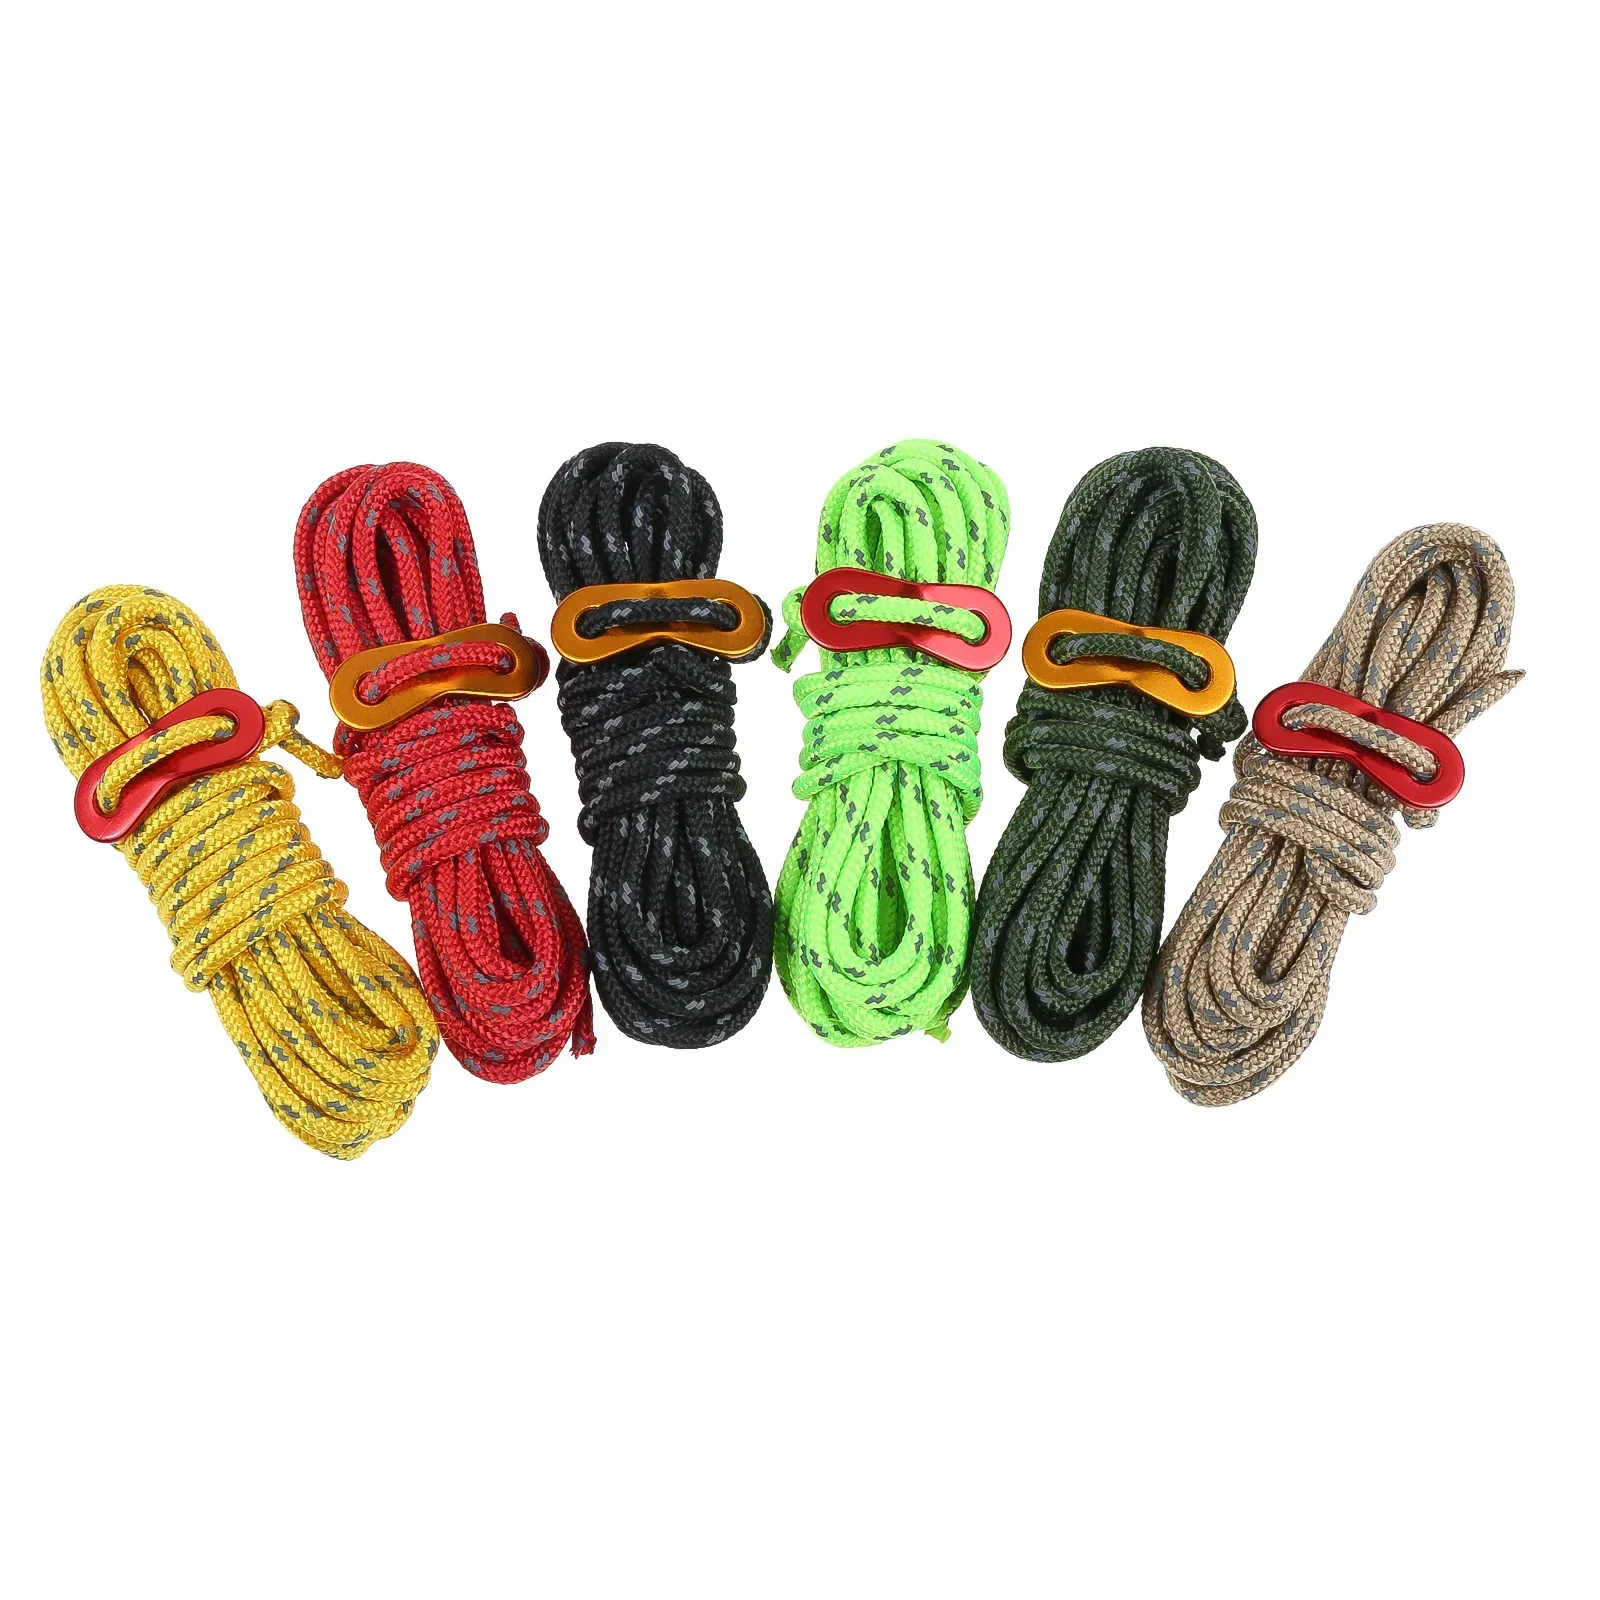 

4m/13ft Multifunction Tent Rope Reflective Tent Guy Line Parachute Cord Lanyard Outdoor Camping Hiking Tent Accessories 4MM Dia